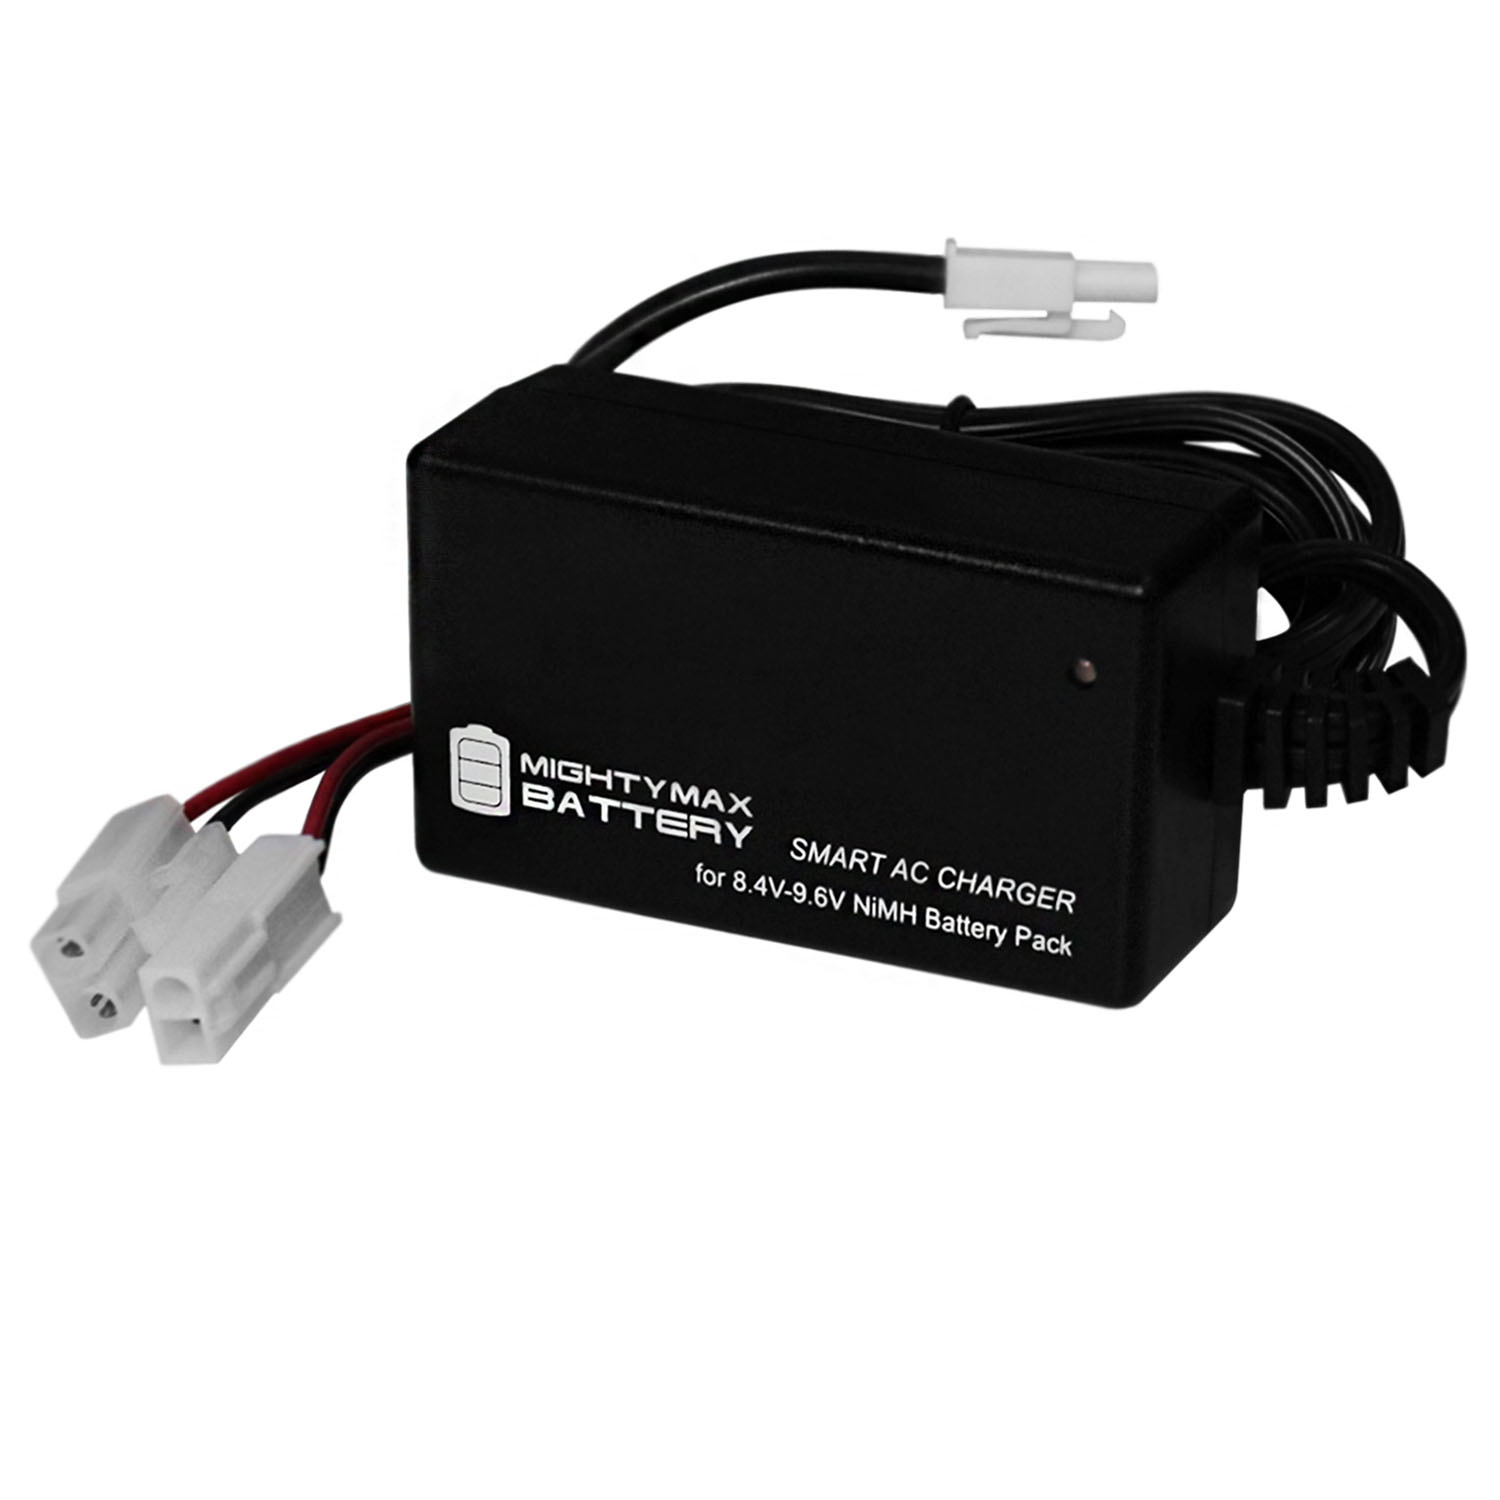 Smart Charger for 8.4V-9.6V NiMH Battery Packs w/ Mini Tamiya Connector - ML-8496CH